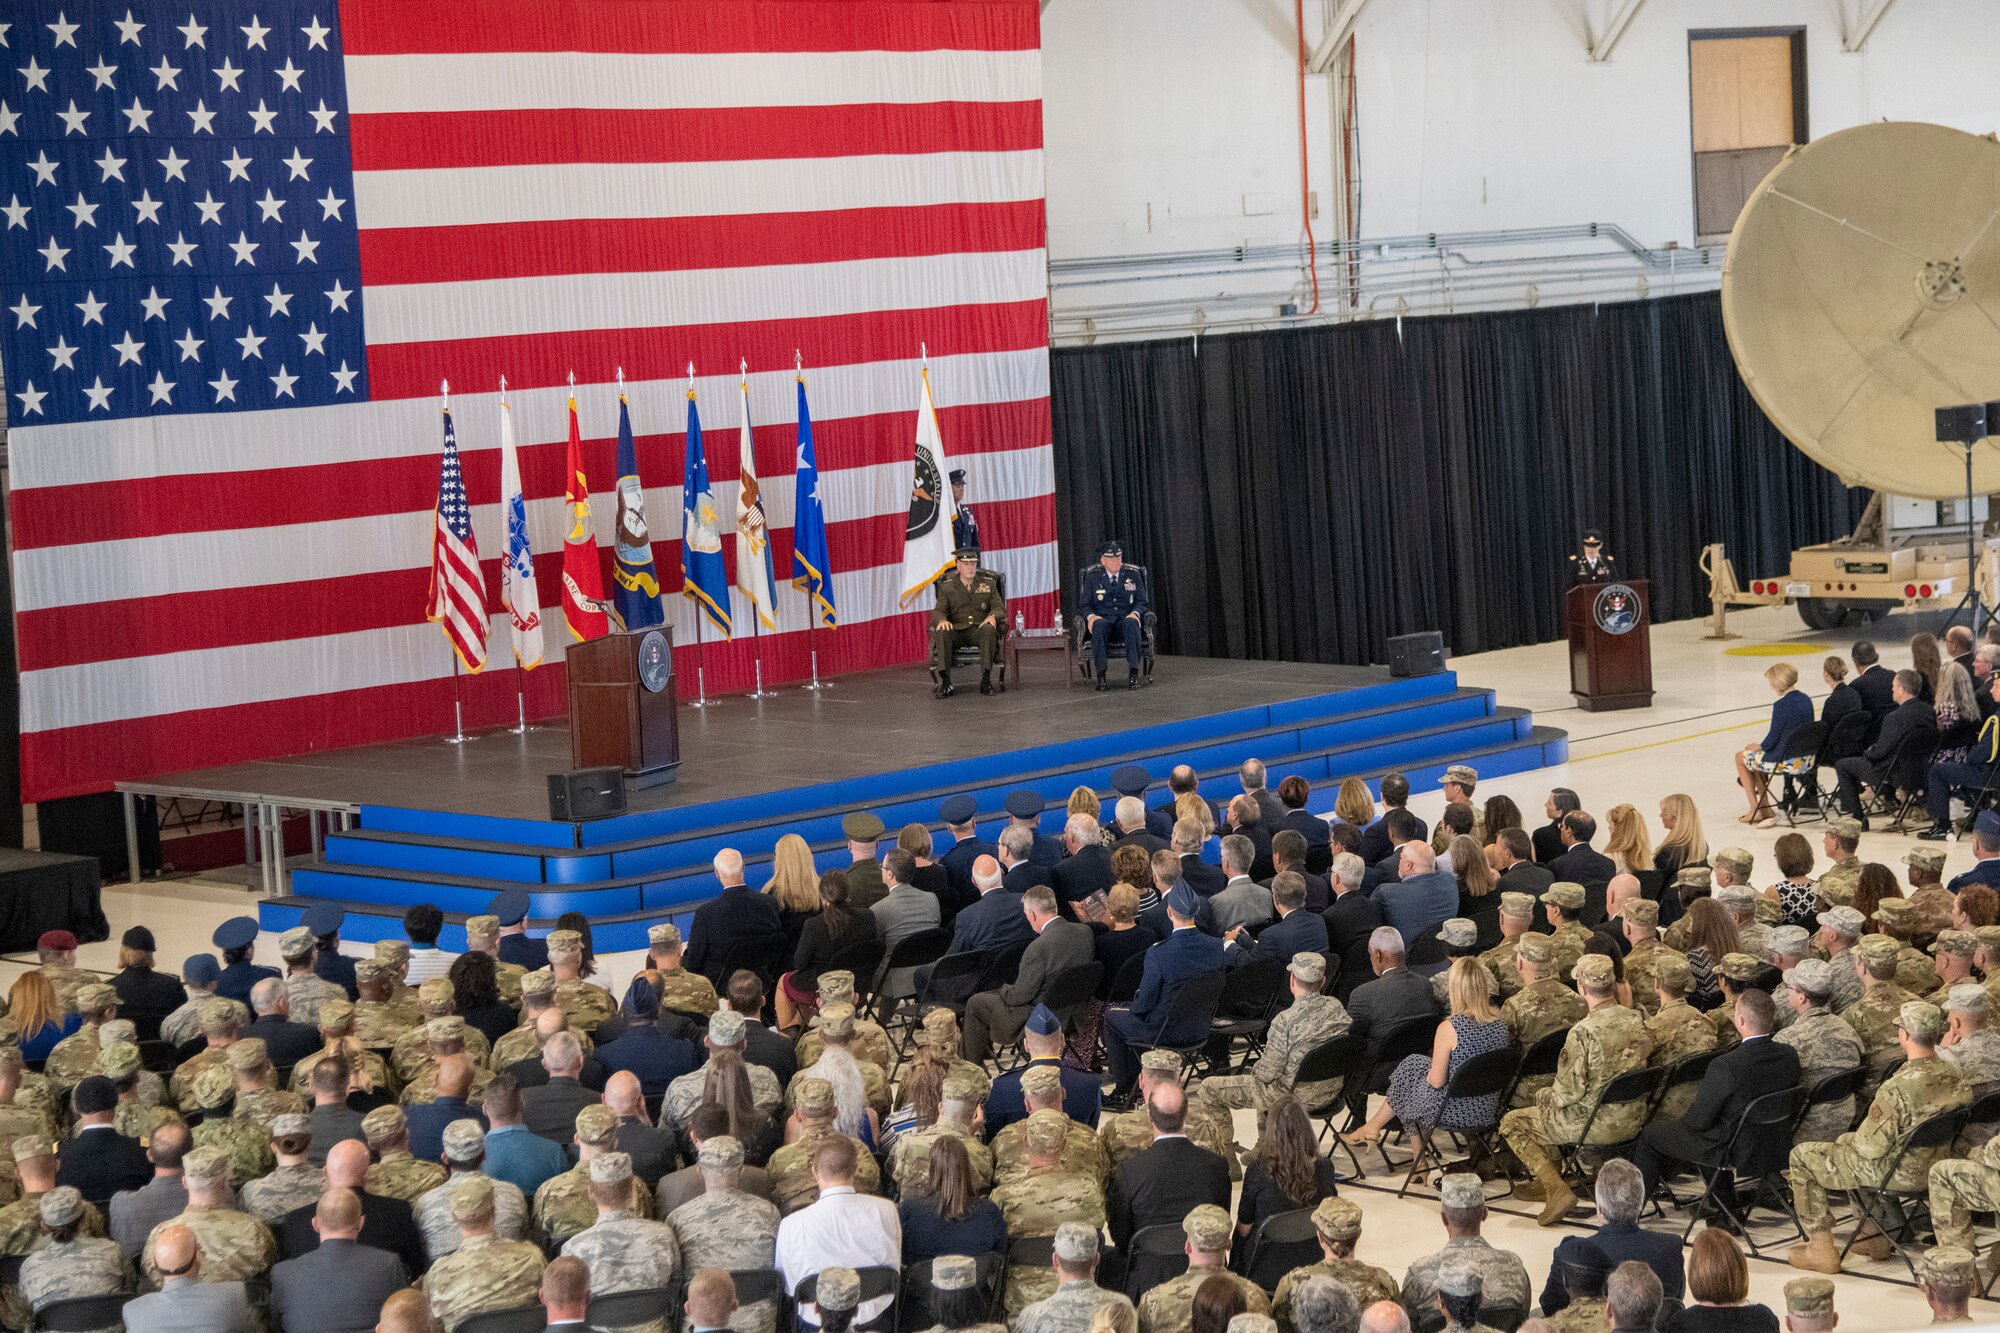 Marine Corps Gen. Joe Dunford, chairman of the Joint Chiefs of Staff, and Air Force Gen. John W. Raymond, commander, U.S. Space Command and Air Force Space Command, deliver remarks at the USSPACECOM Recognition and Establishment Ceremony at Peterson Air Force Base, Colorado Sept. 9, 2019.